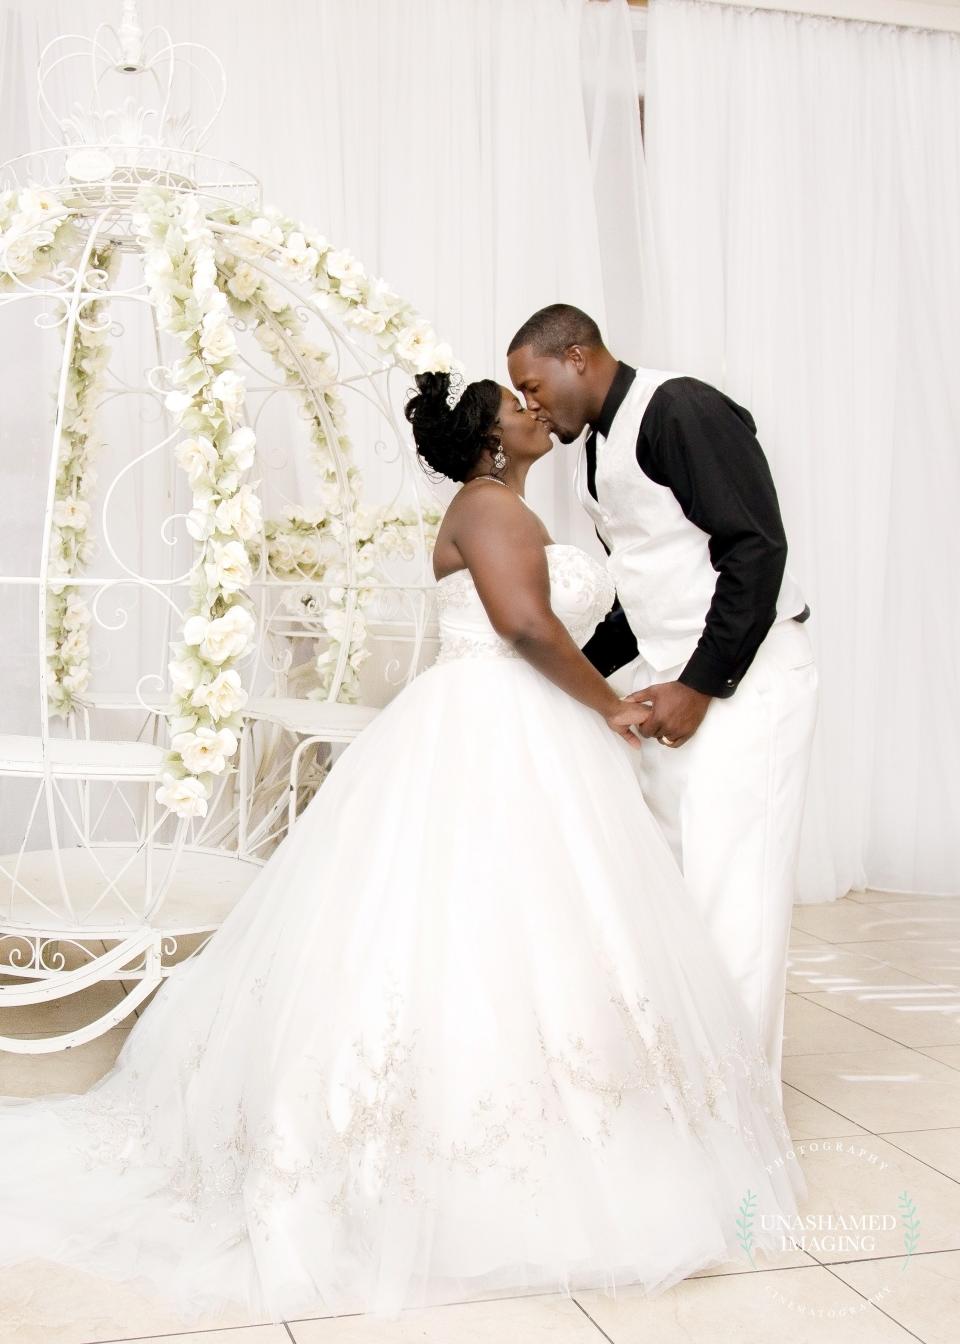 "Courtney and DeAndre tied the knot on July 29&nbsp;at Crystal Ballroom at Veranda in MetroWest, Florida." --&nbsp;<i>Anesha Collins&nbsp;</i>